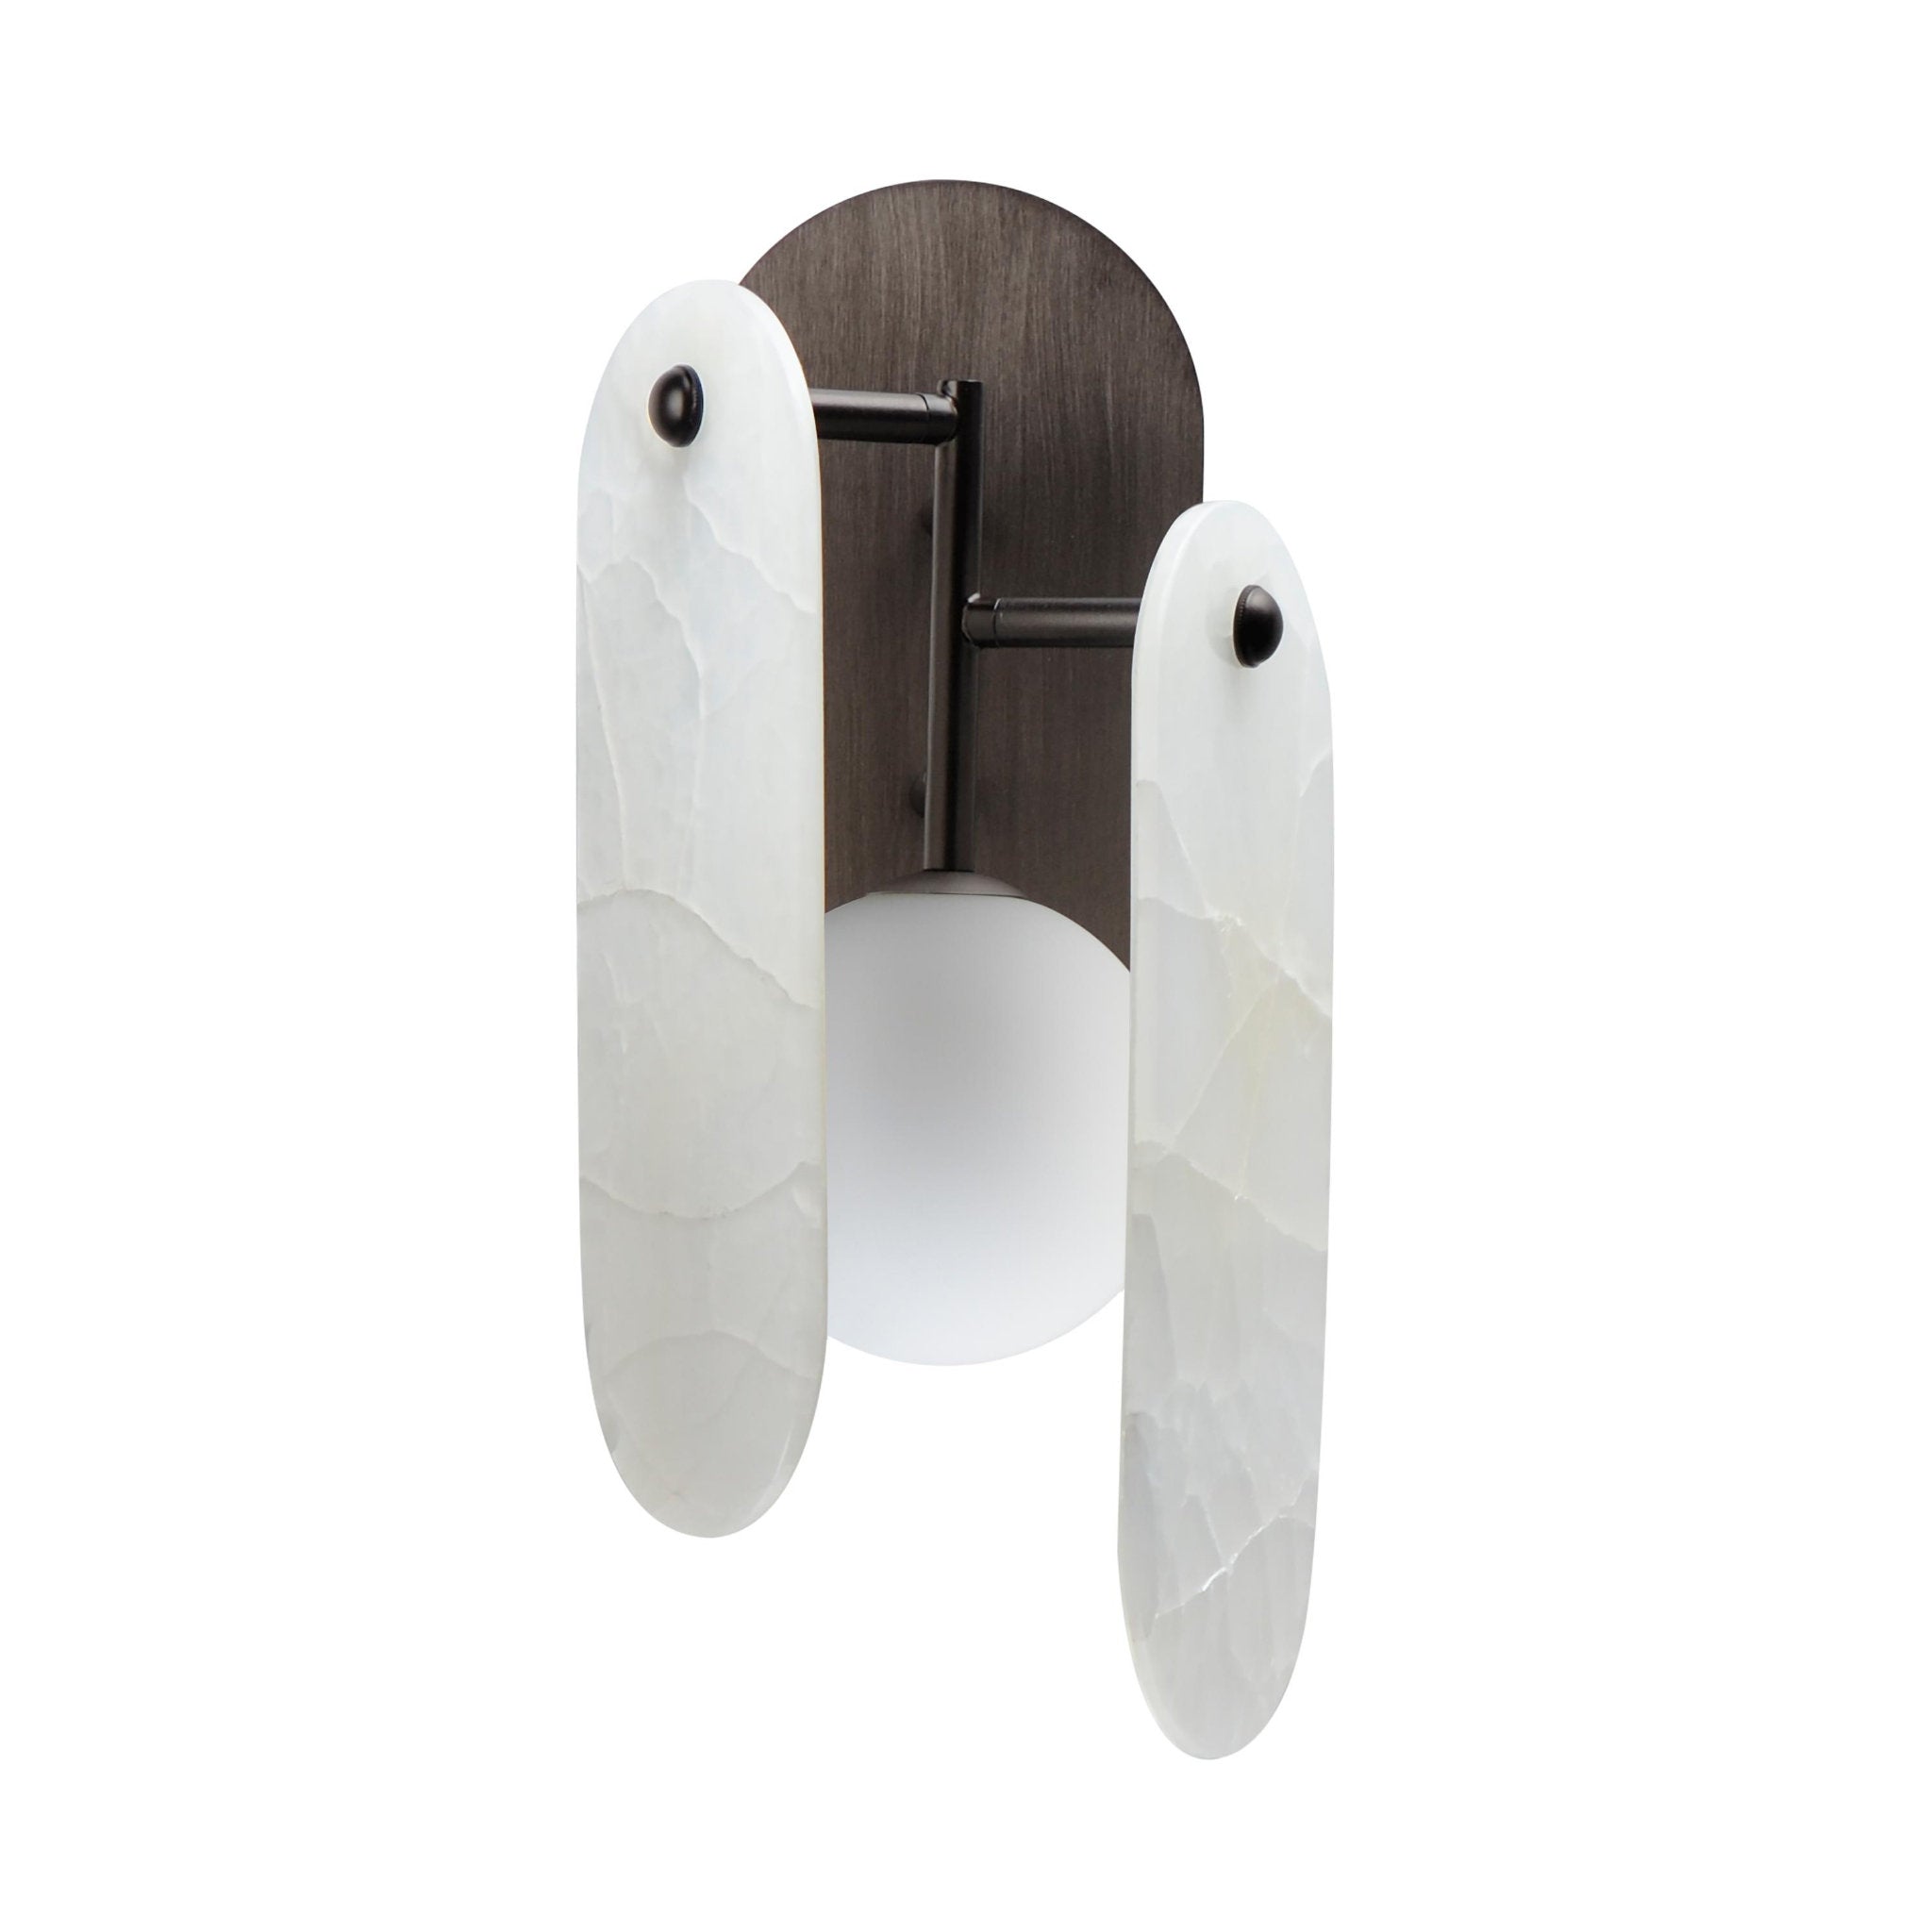 Studio M SM24810OXBBZ Megalith White Onyx Wall Sconce in Brushed Bronze by Nina Magon